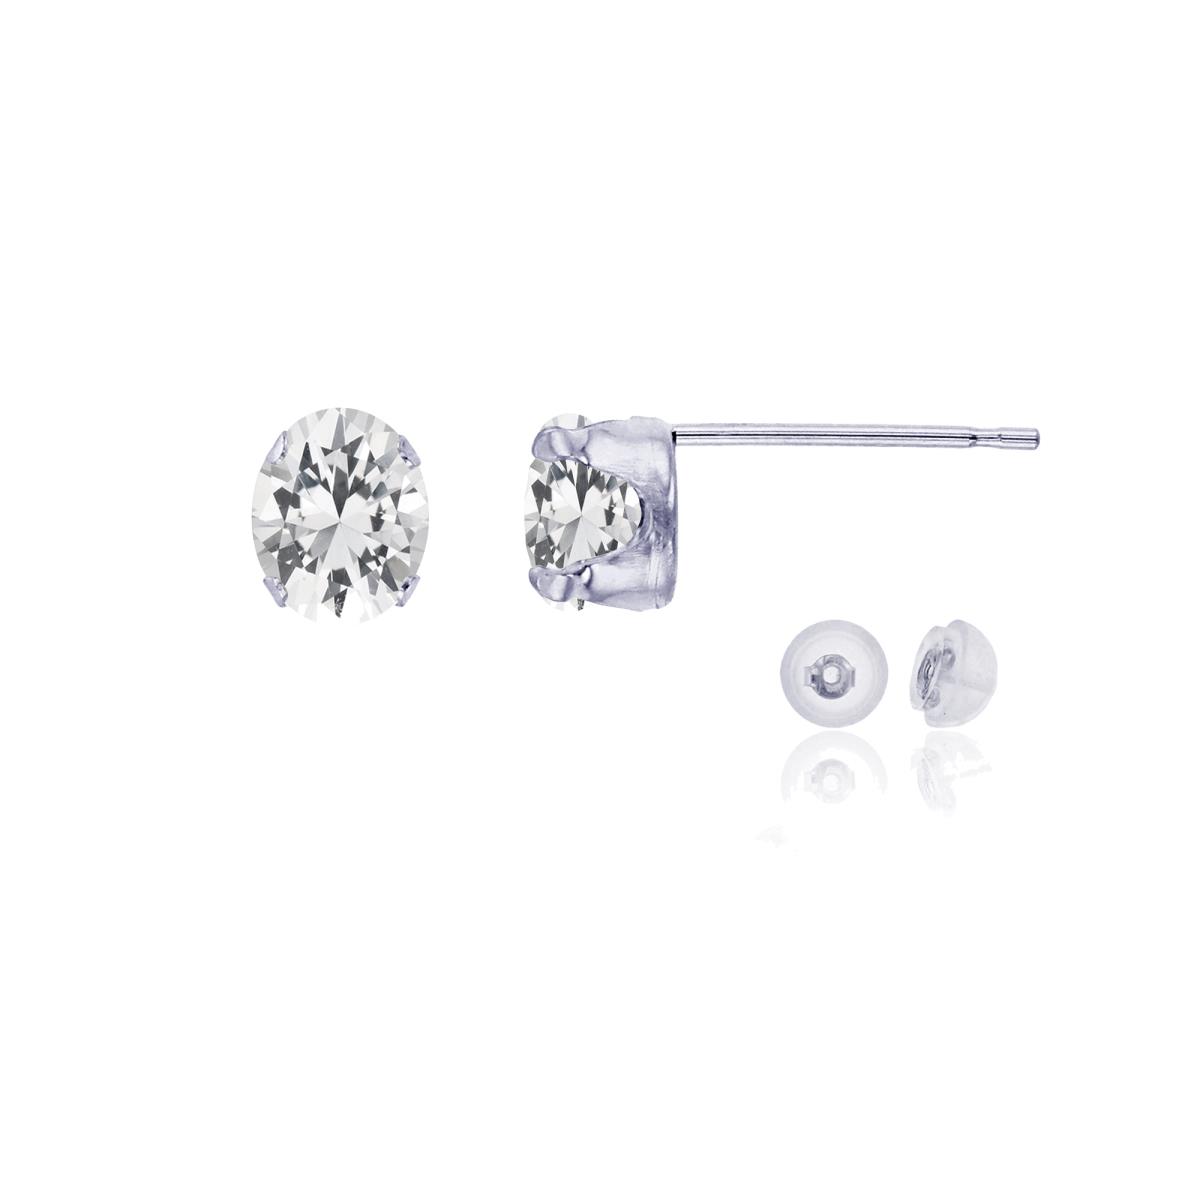 14K White Gold 6x4mm Oval Cr White Sapphire Stud Earring with Silicone Back